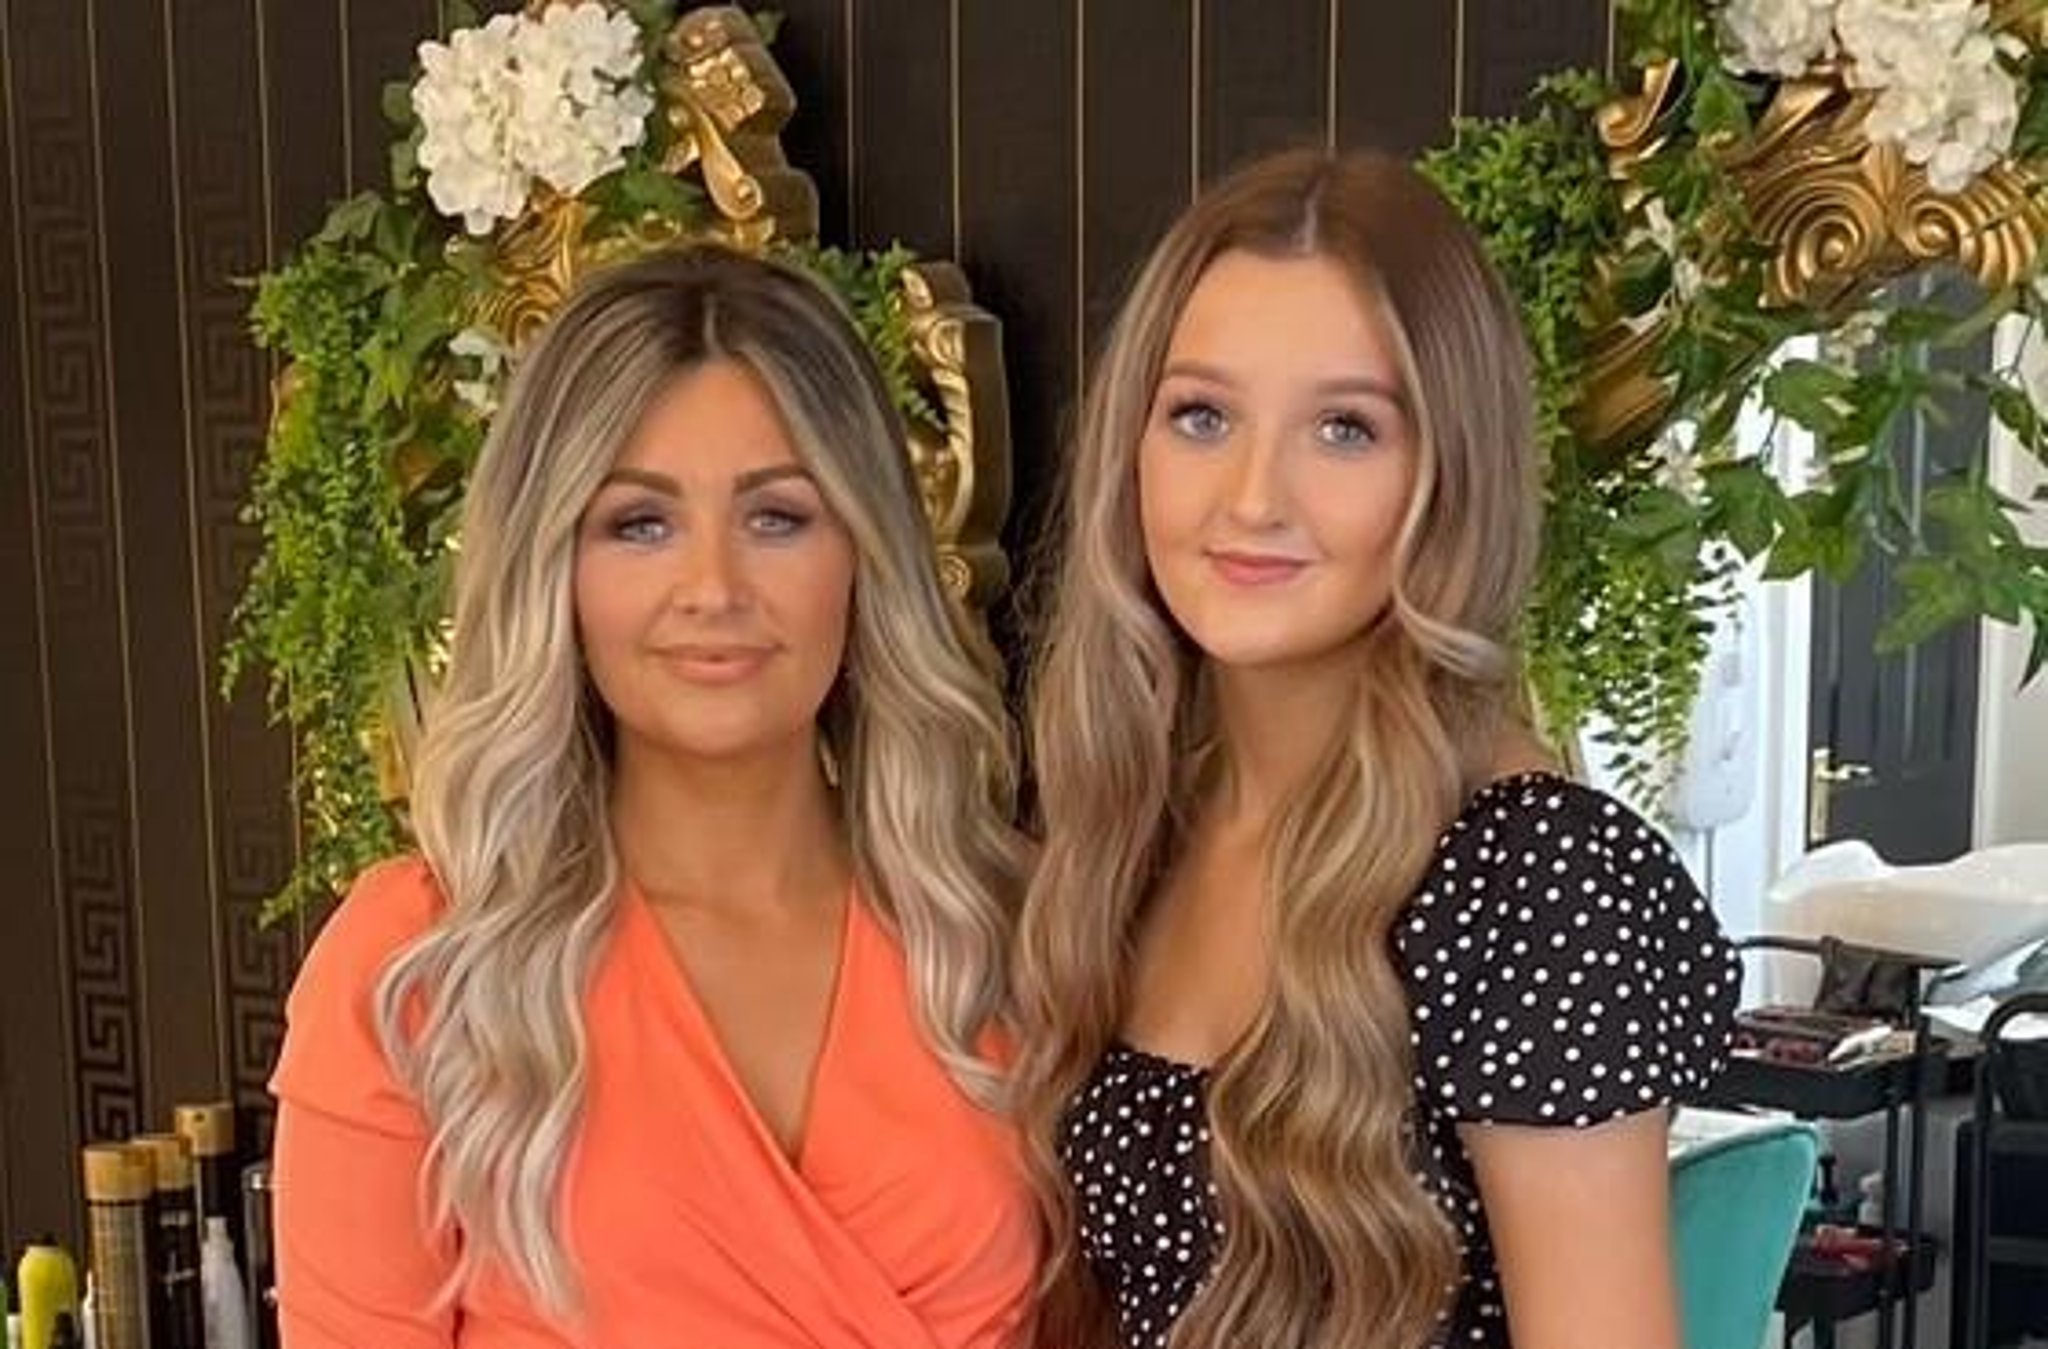 Mum and daughter hair and beauty duo up for award